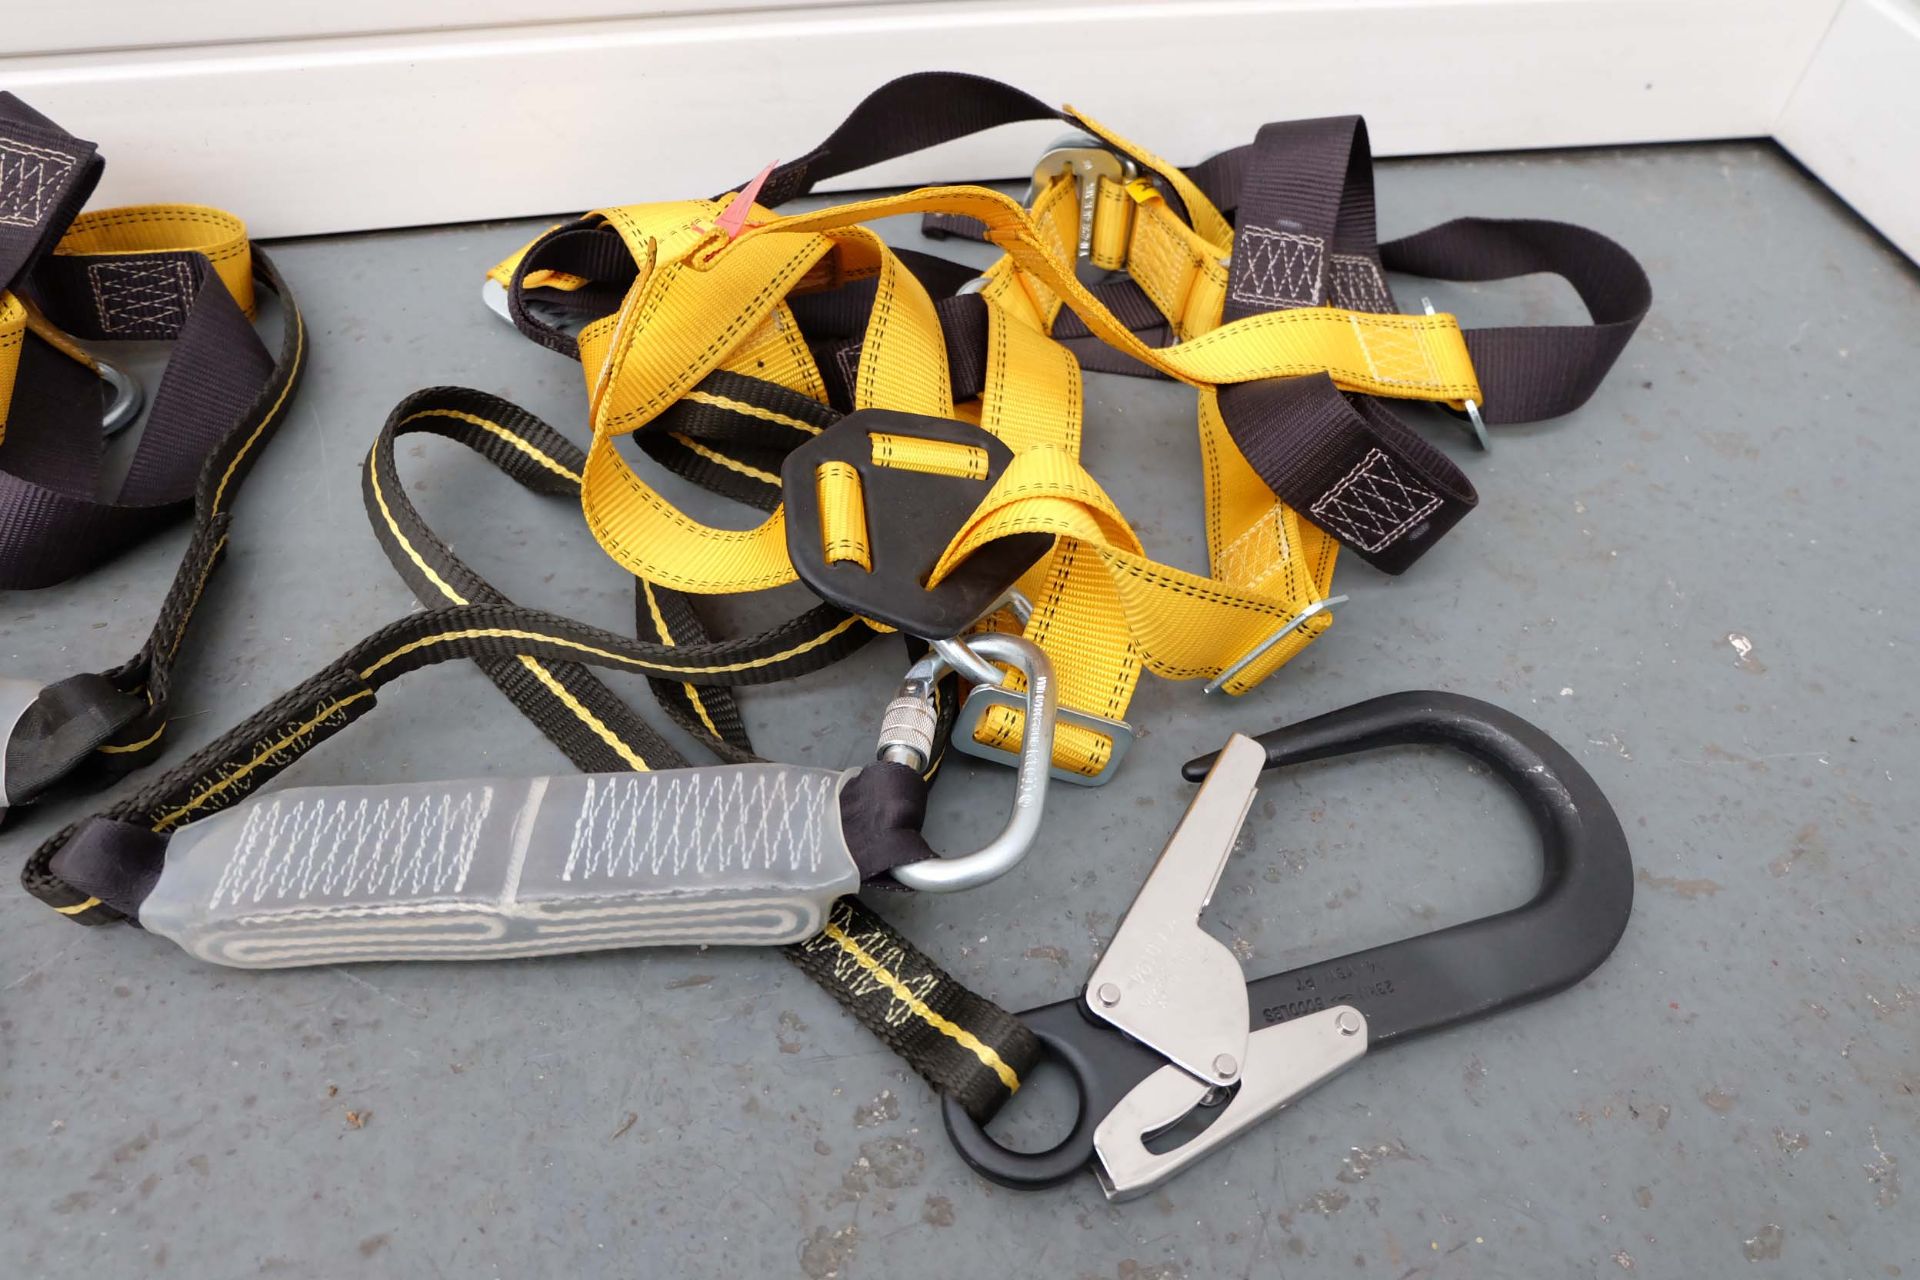 2 x Ridgegear Ltd Model RGH2 Two Point Front & Rear Safety Harnesses. - Image 5 of 7